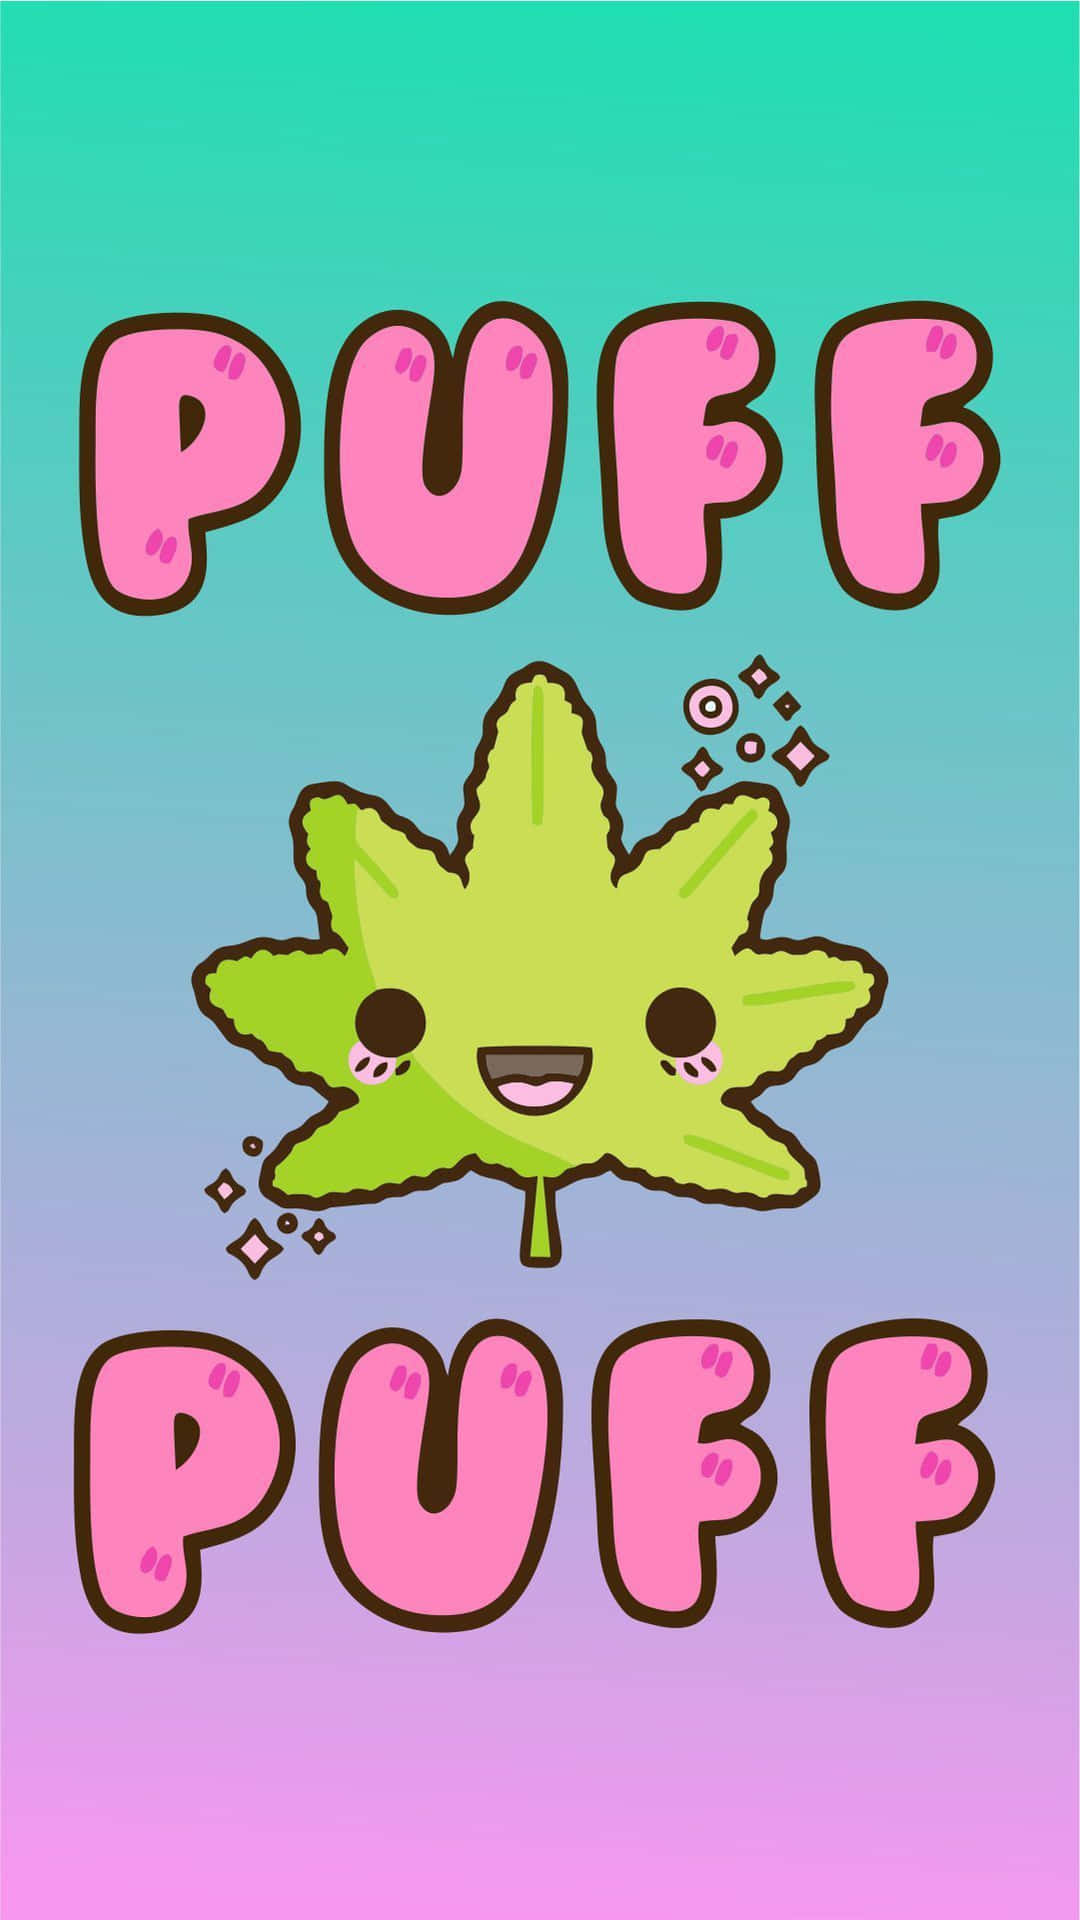 Cute Stoner Iphone Theme Picture